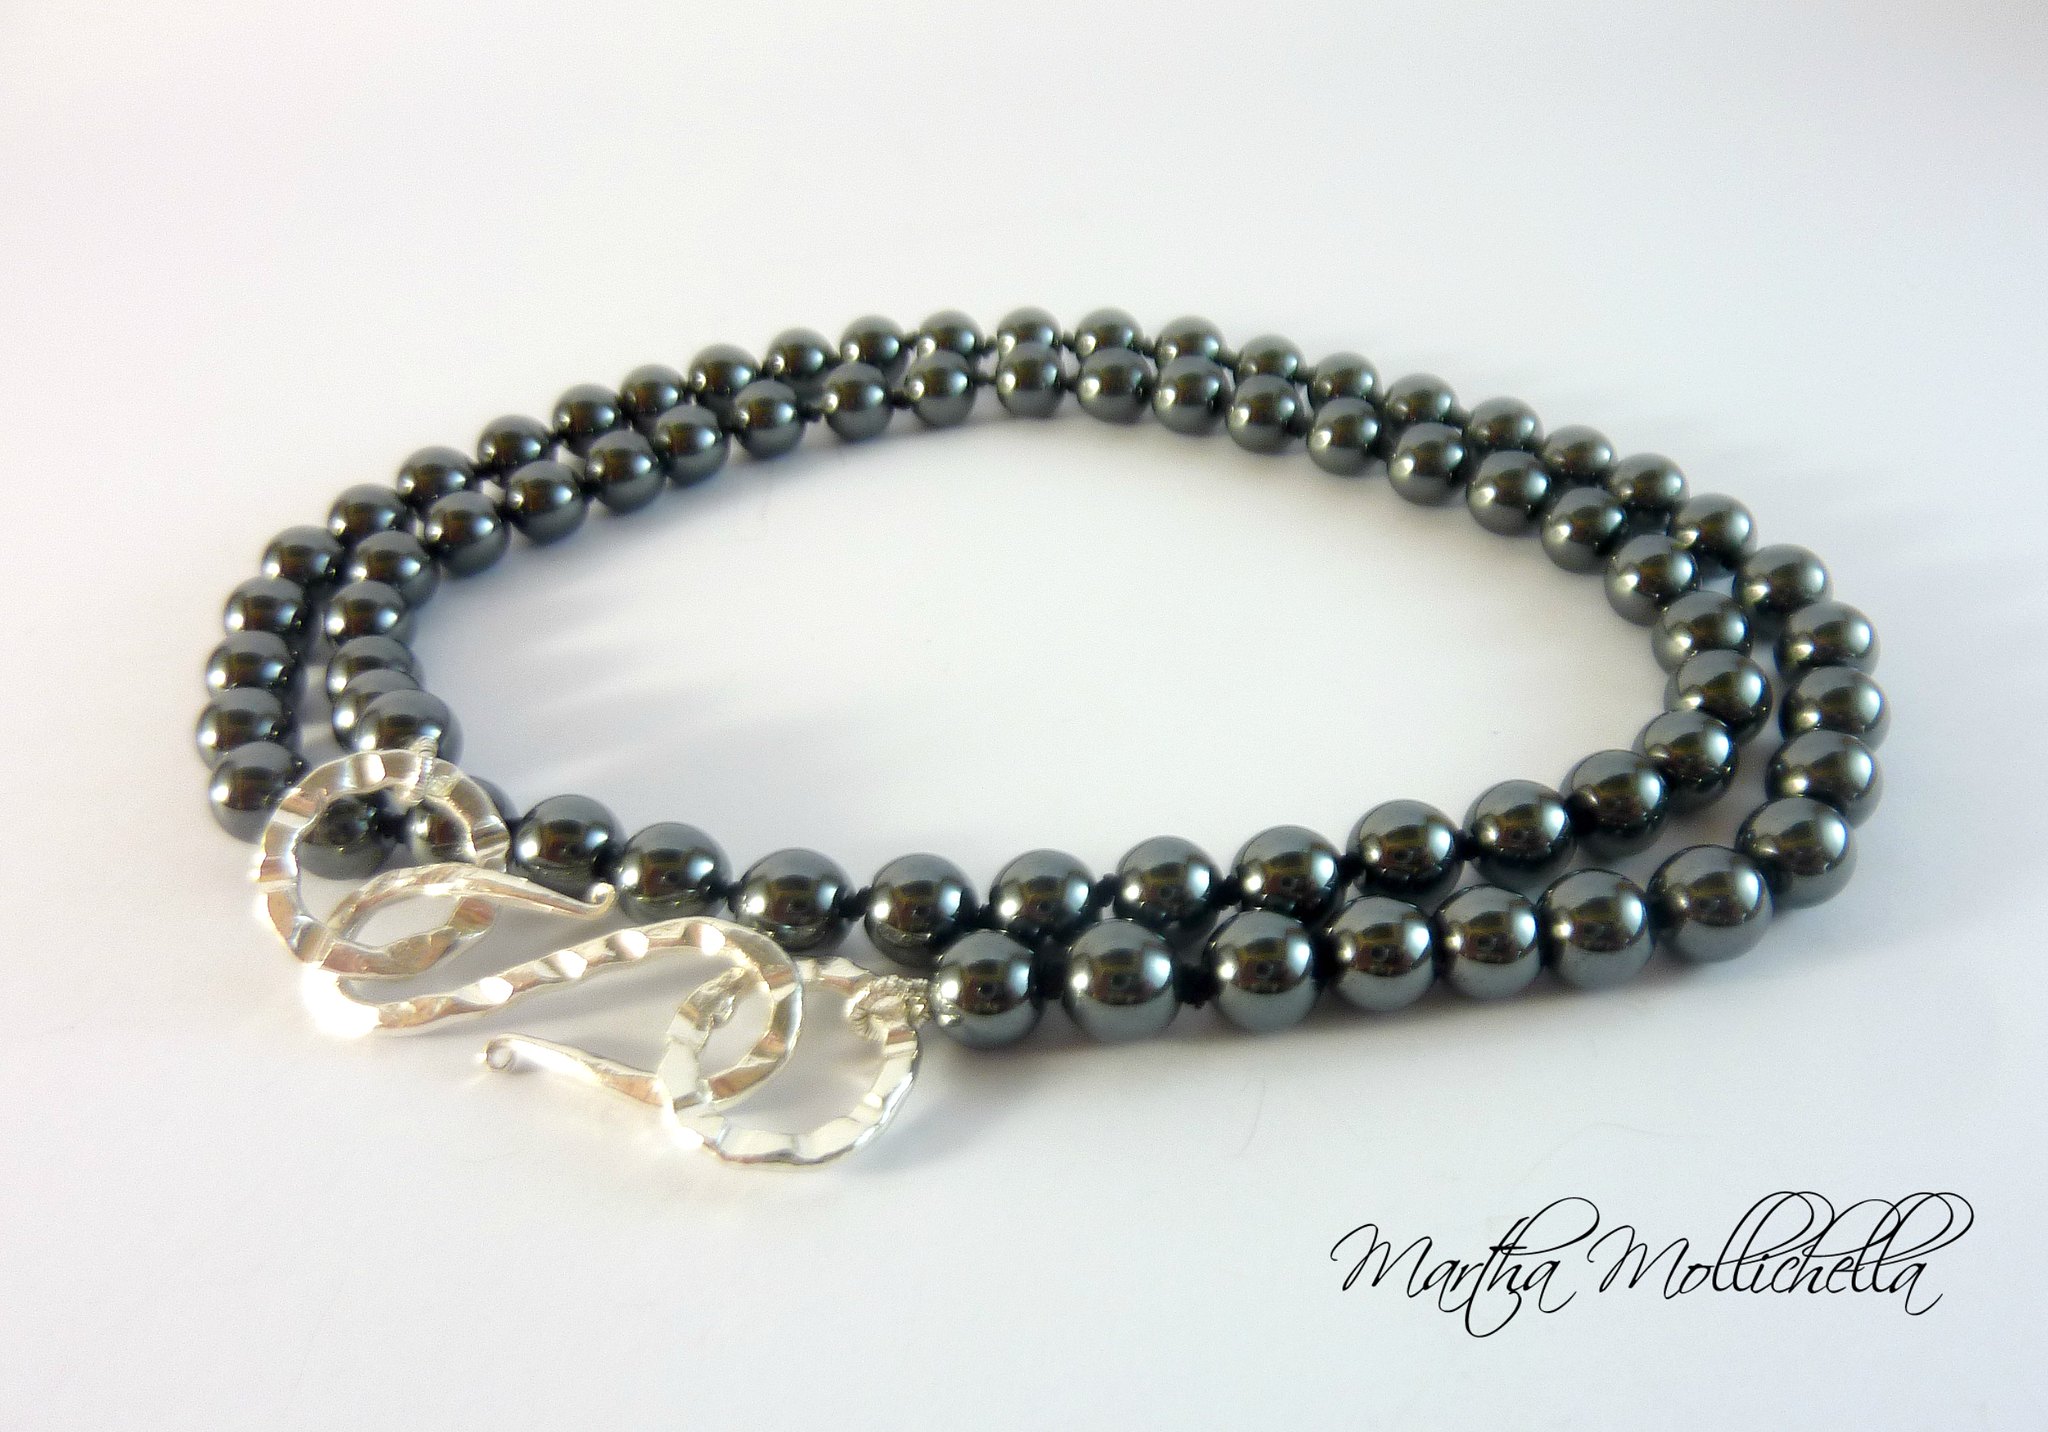 Polynesian pearls handmade with black pearls, beads, hematite pearls, sterling silver 925 handmade in Italy